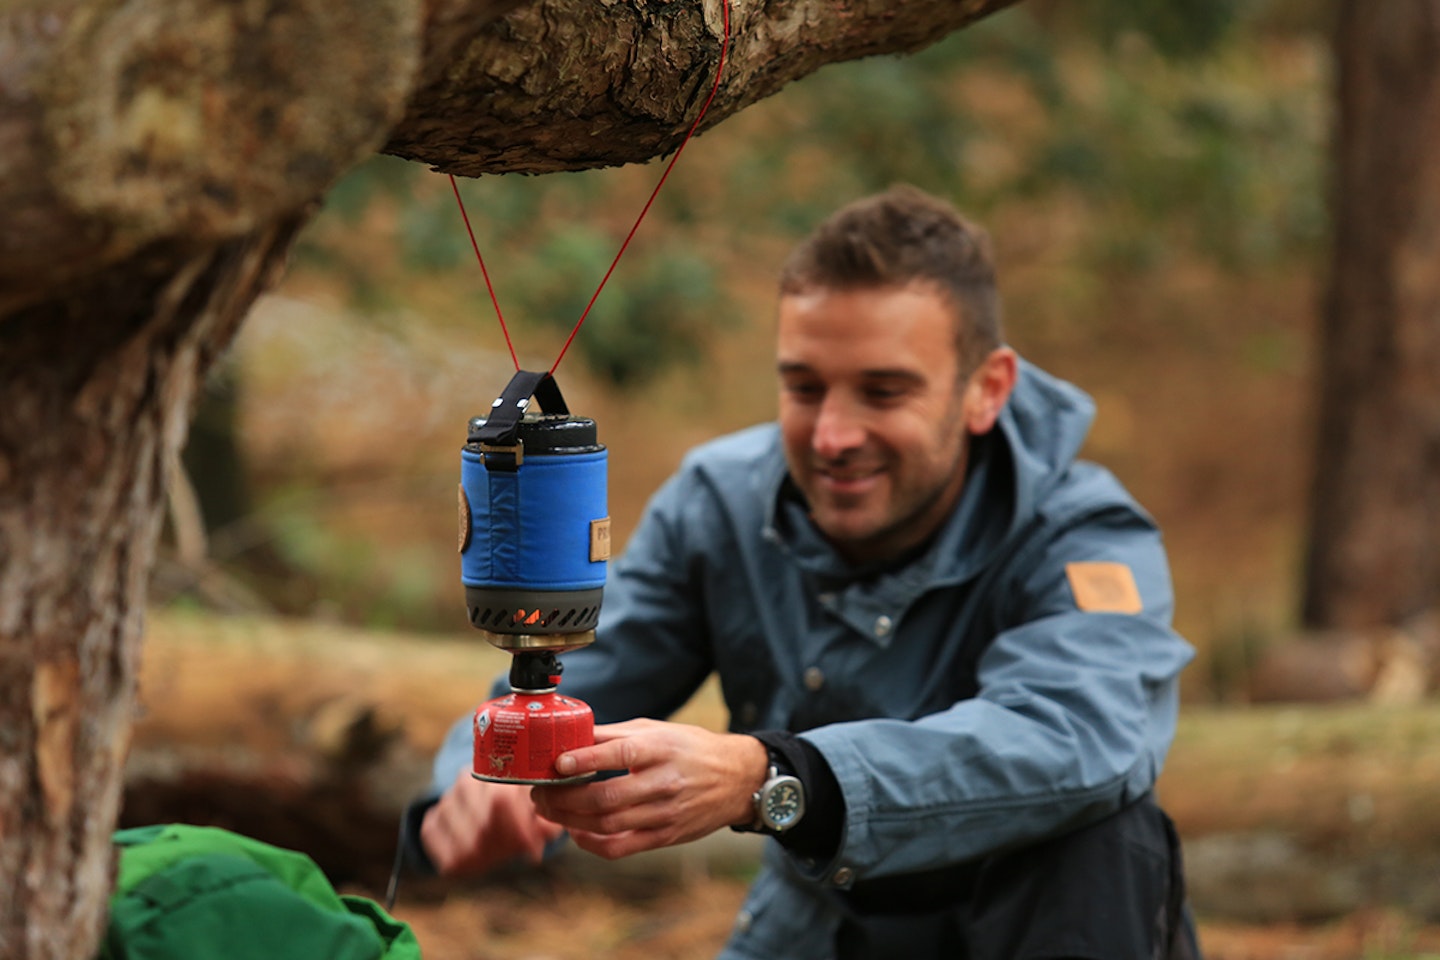 Man camping outdoors with backpacking stove hanging from tree